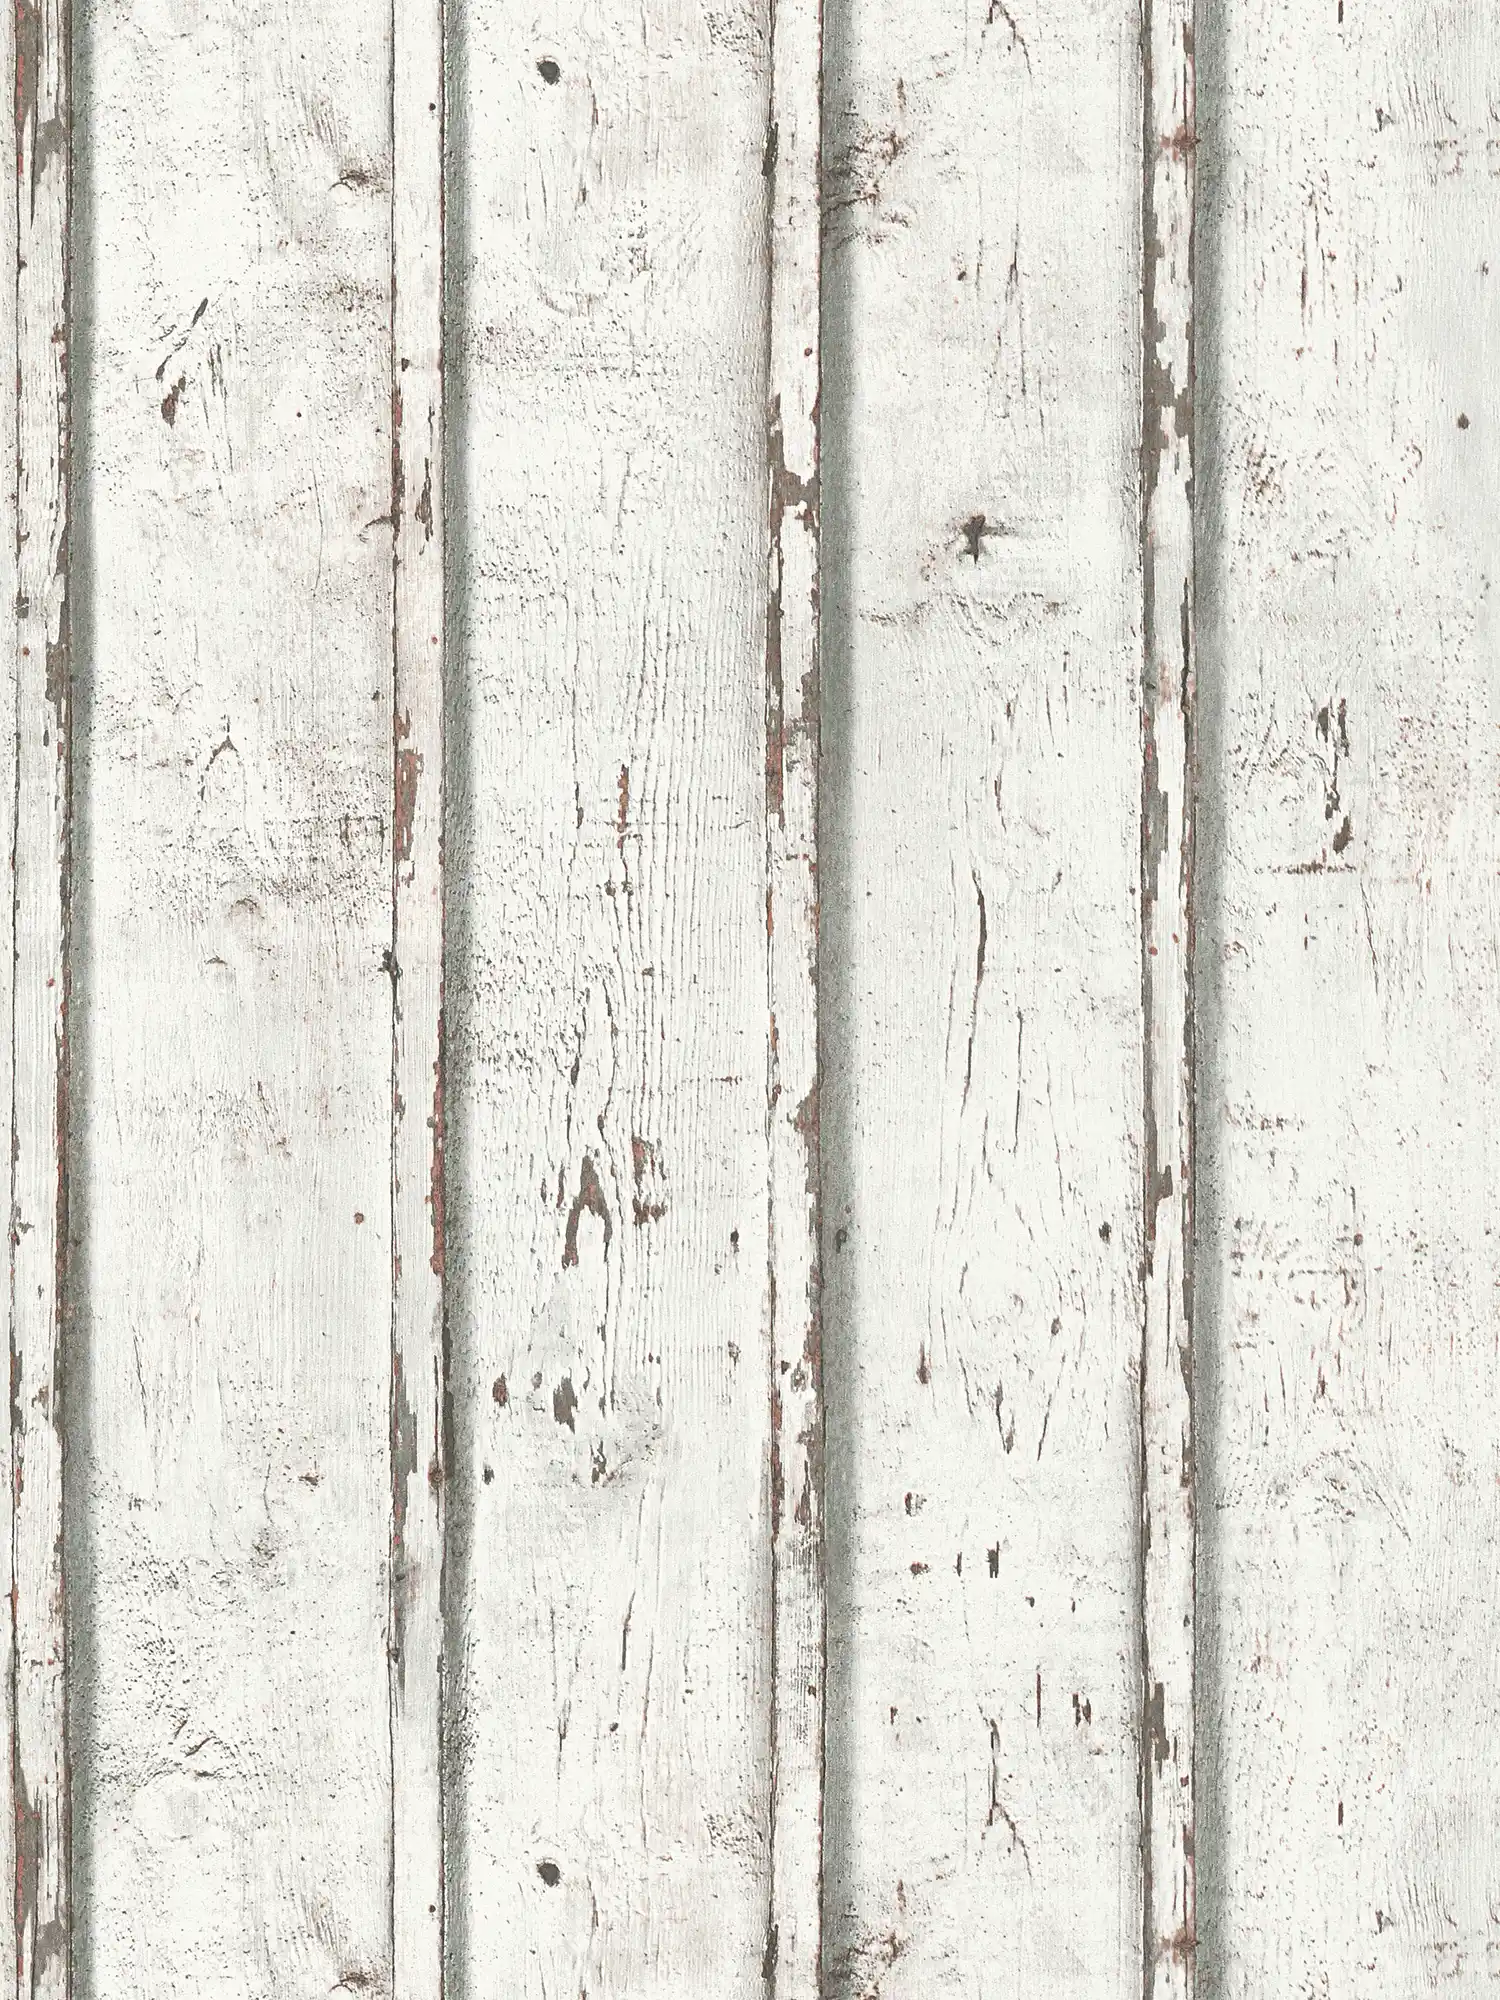 Wooden wallpaper in used look with weathered wooden boards - white, cream, grey
